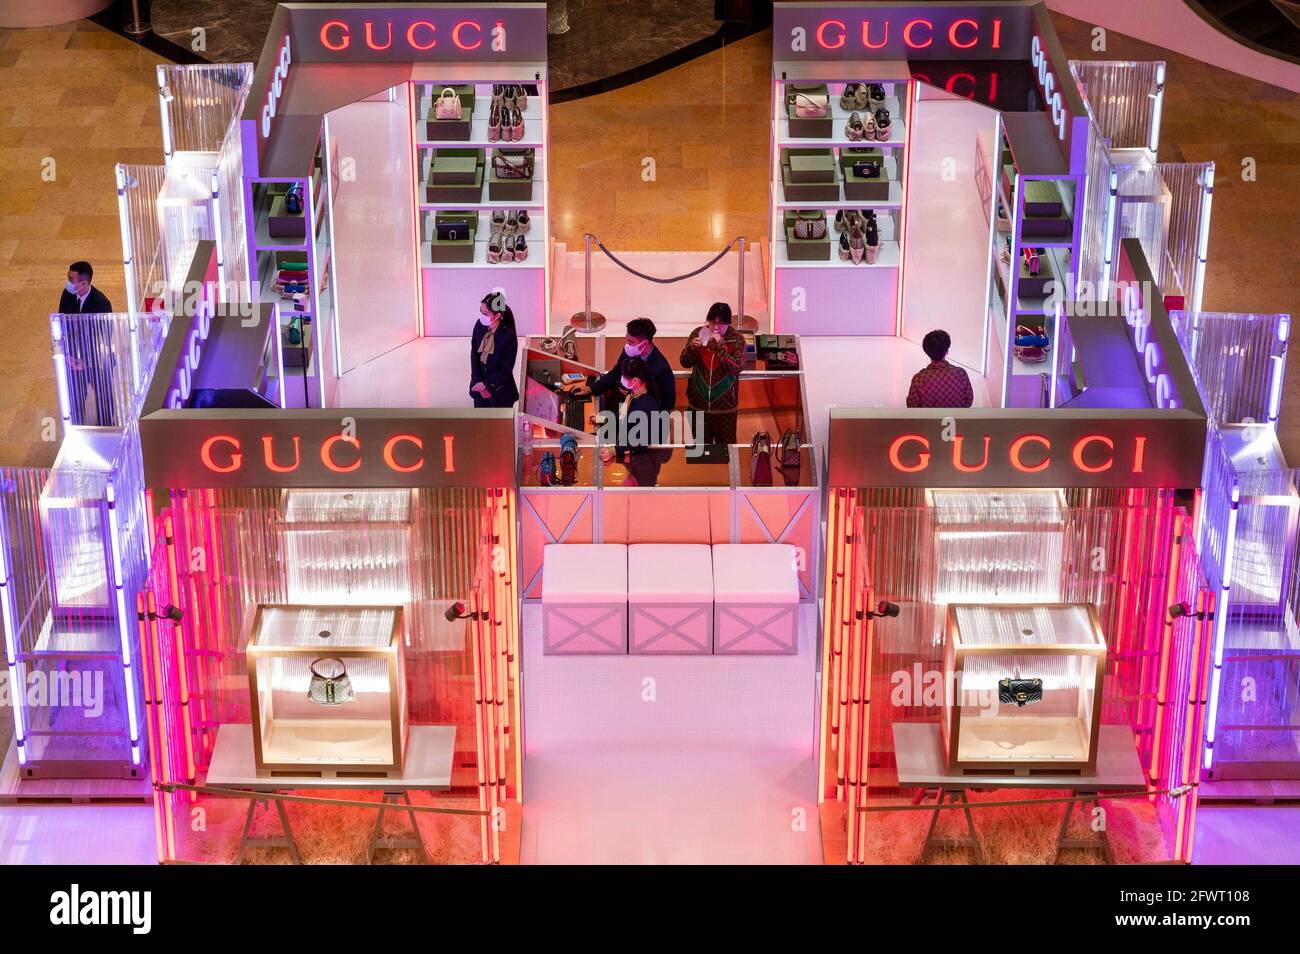 gucci pop up store